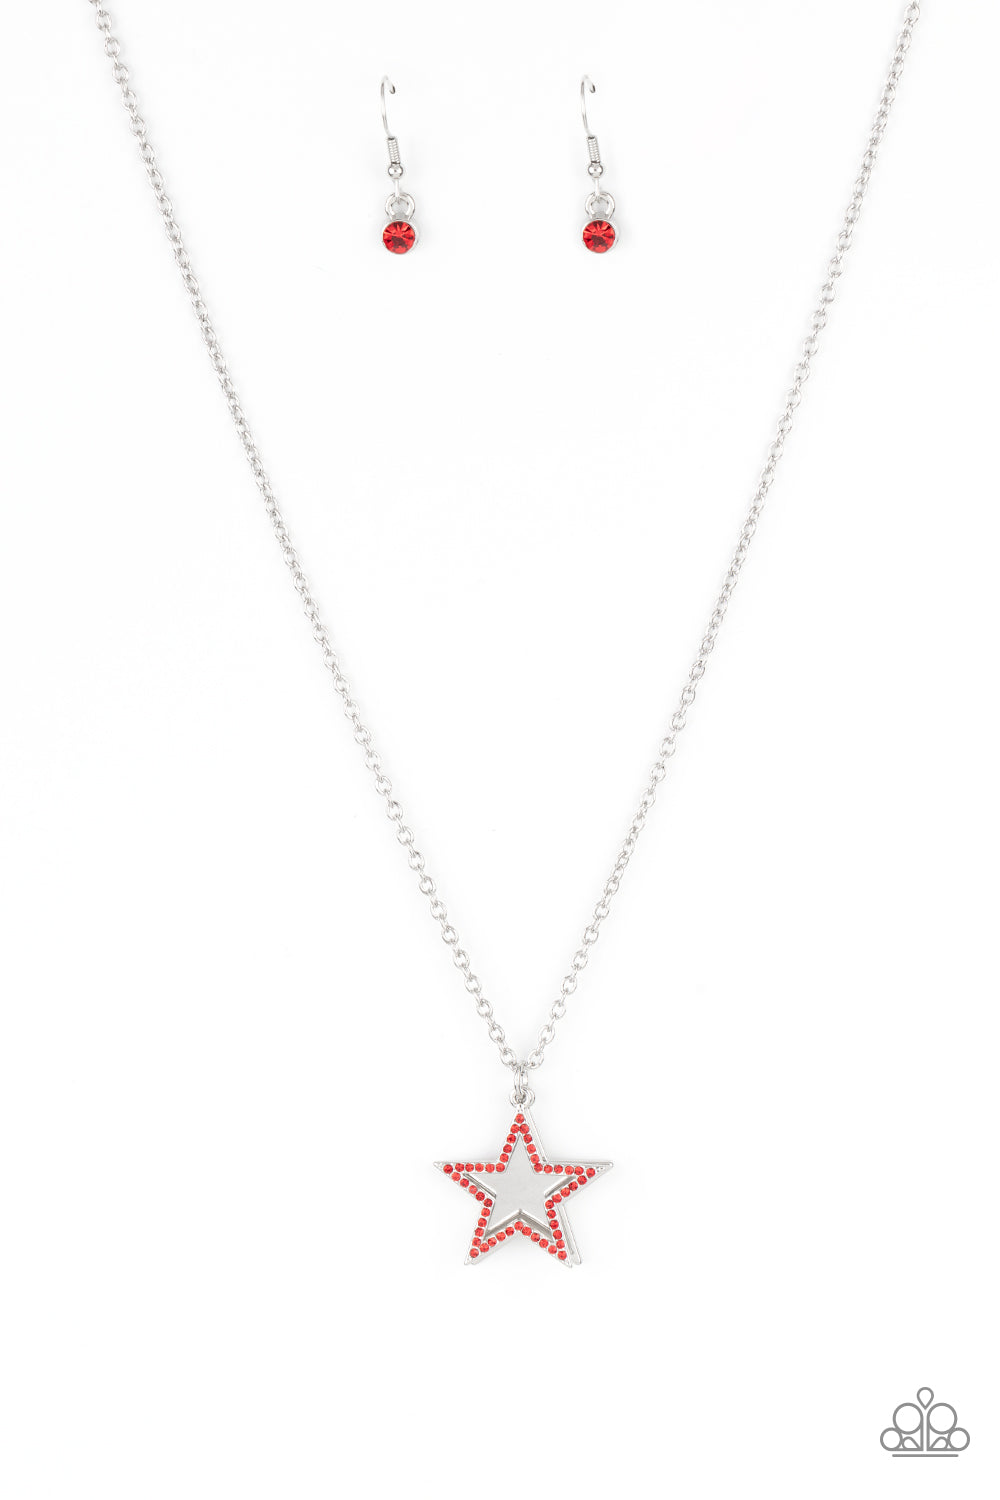 five-dollar-jewelry-american-anthem-red-paparazzi-accessories